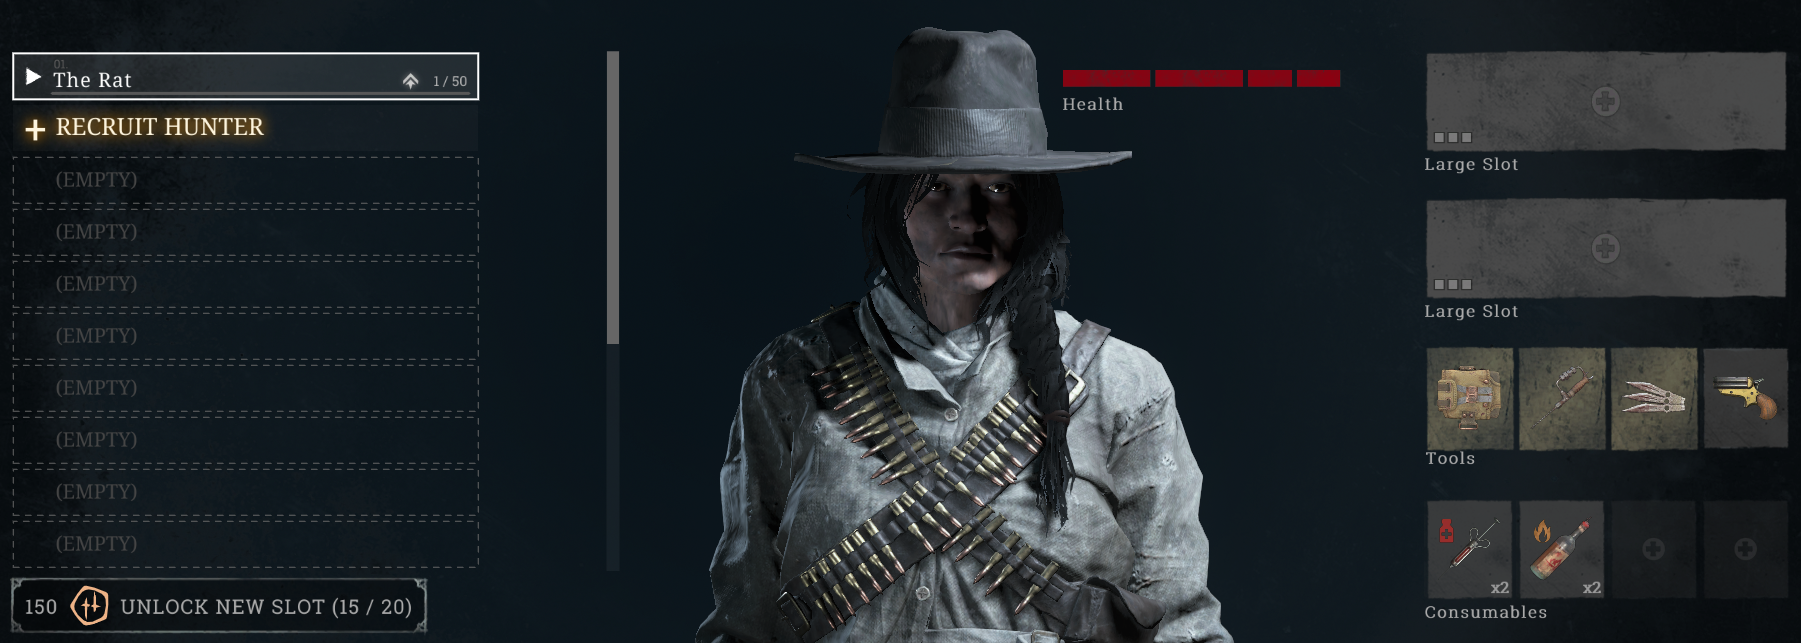 Hunt: Showdown - Become a Rat with a Cool Hat